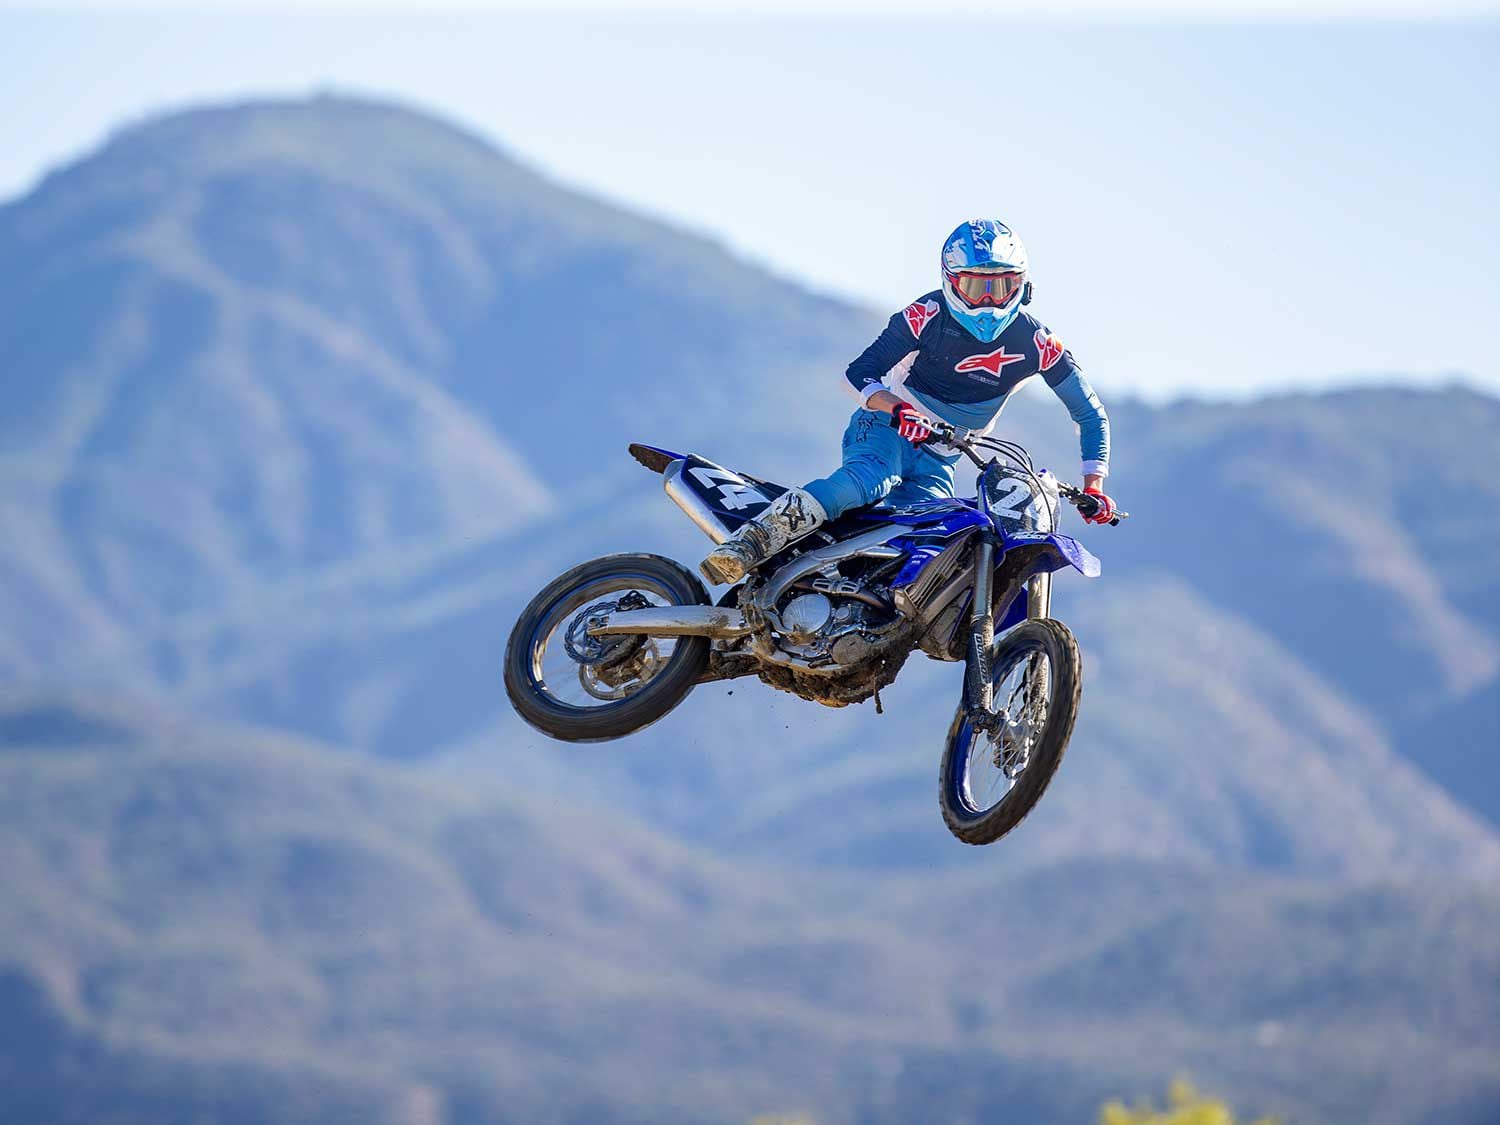 “There are only minimal changes to be made to the YZ250F’s suspension depending on the track conditions because it is so close to perfect in stock form. The balance is very close. I made no adjustments to the ride height and didn’t notice any excessive pitching either.” <em>—Allan Brown</em>